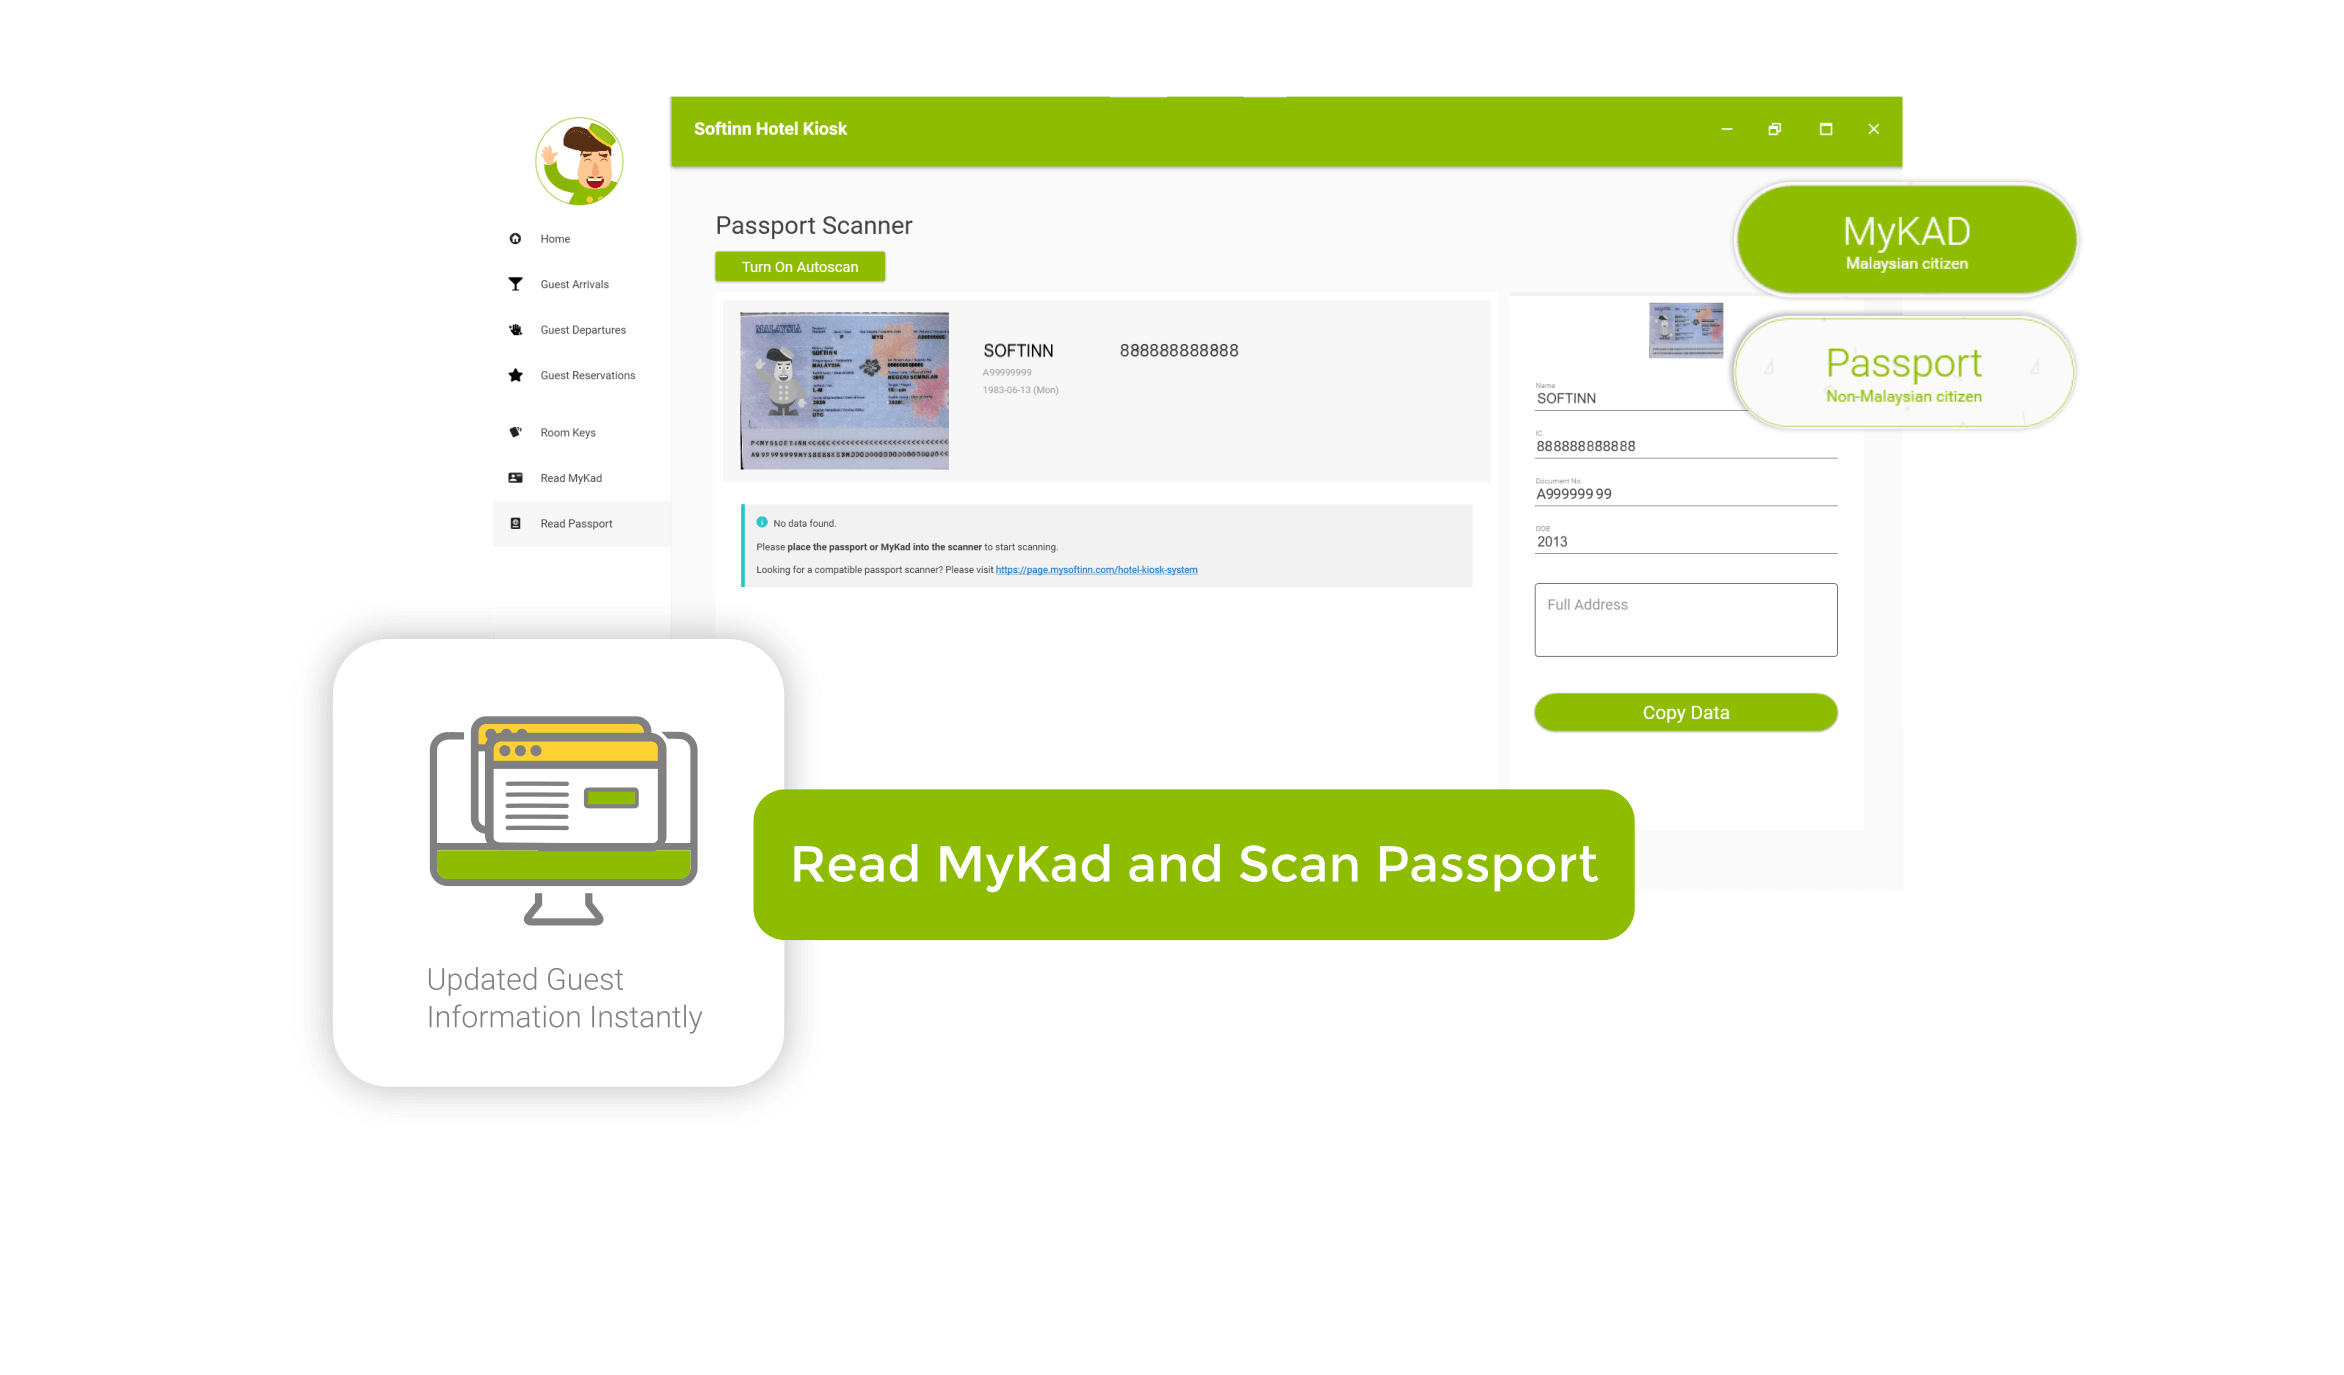 MyKad or passport are both allowed